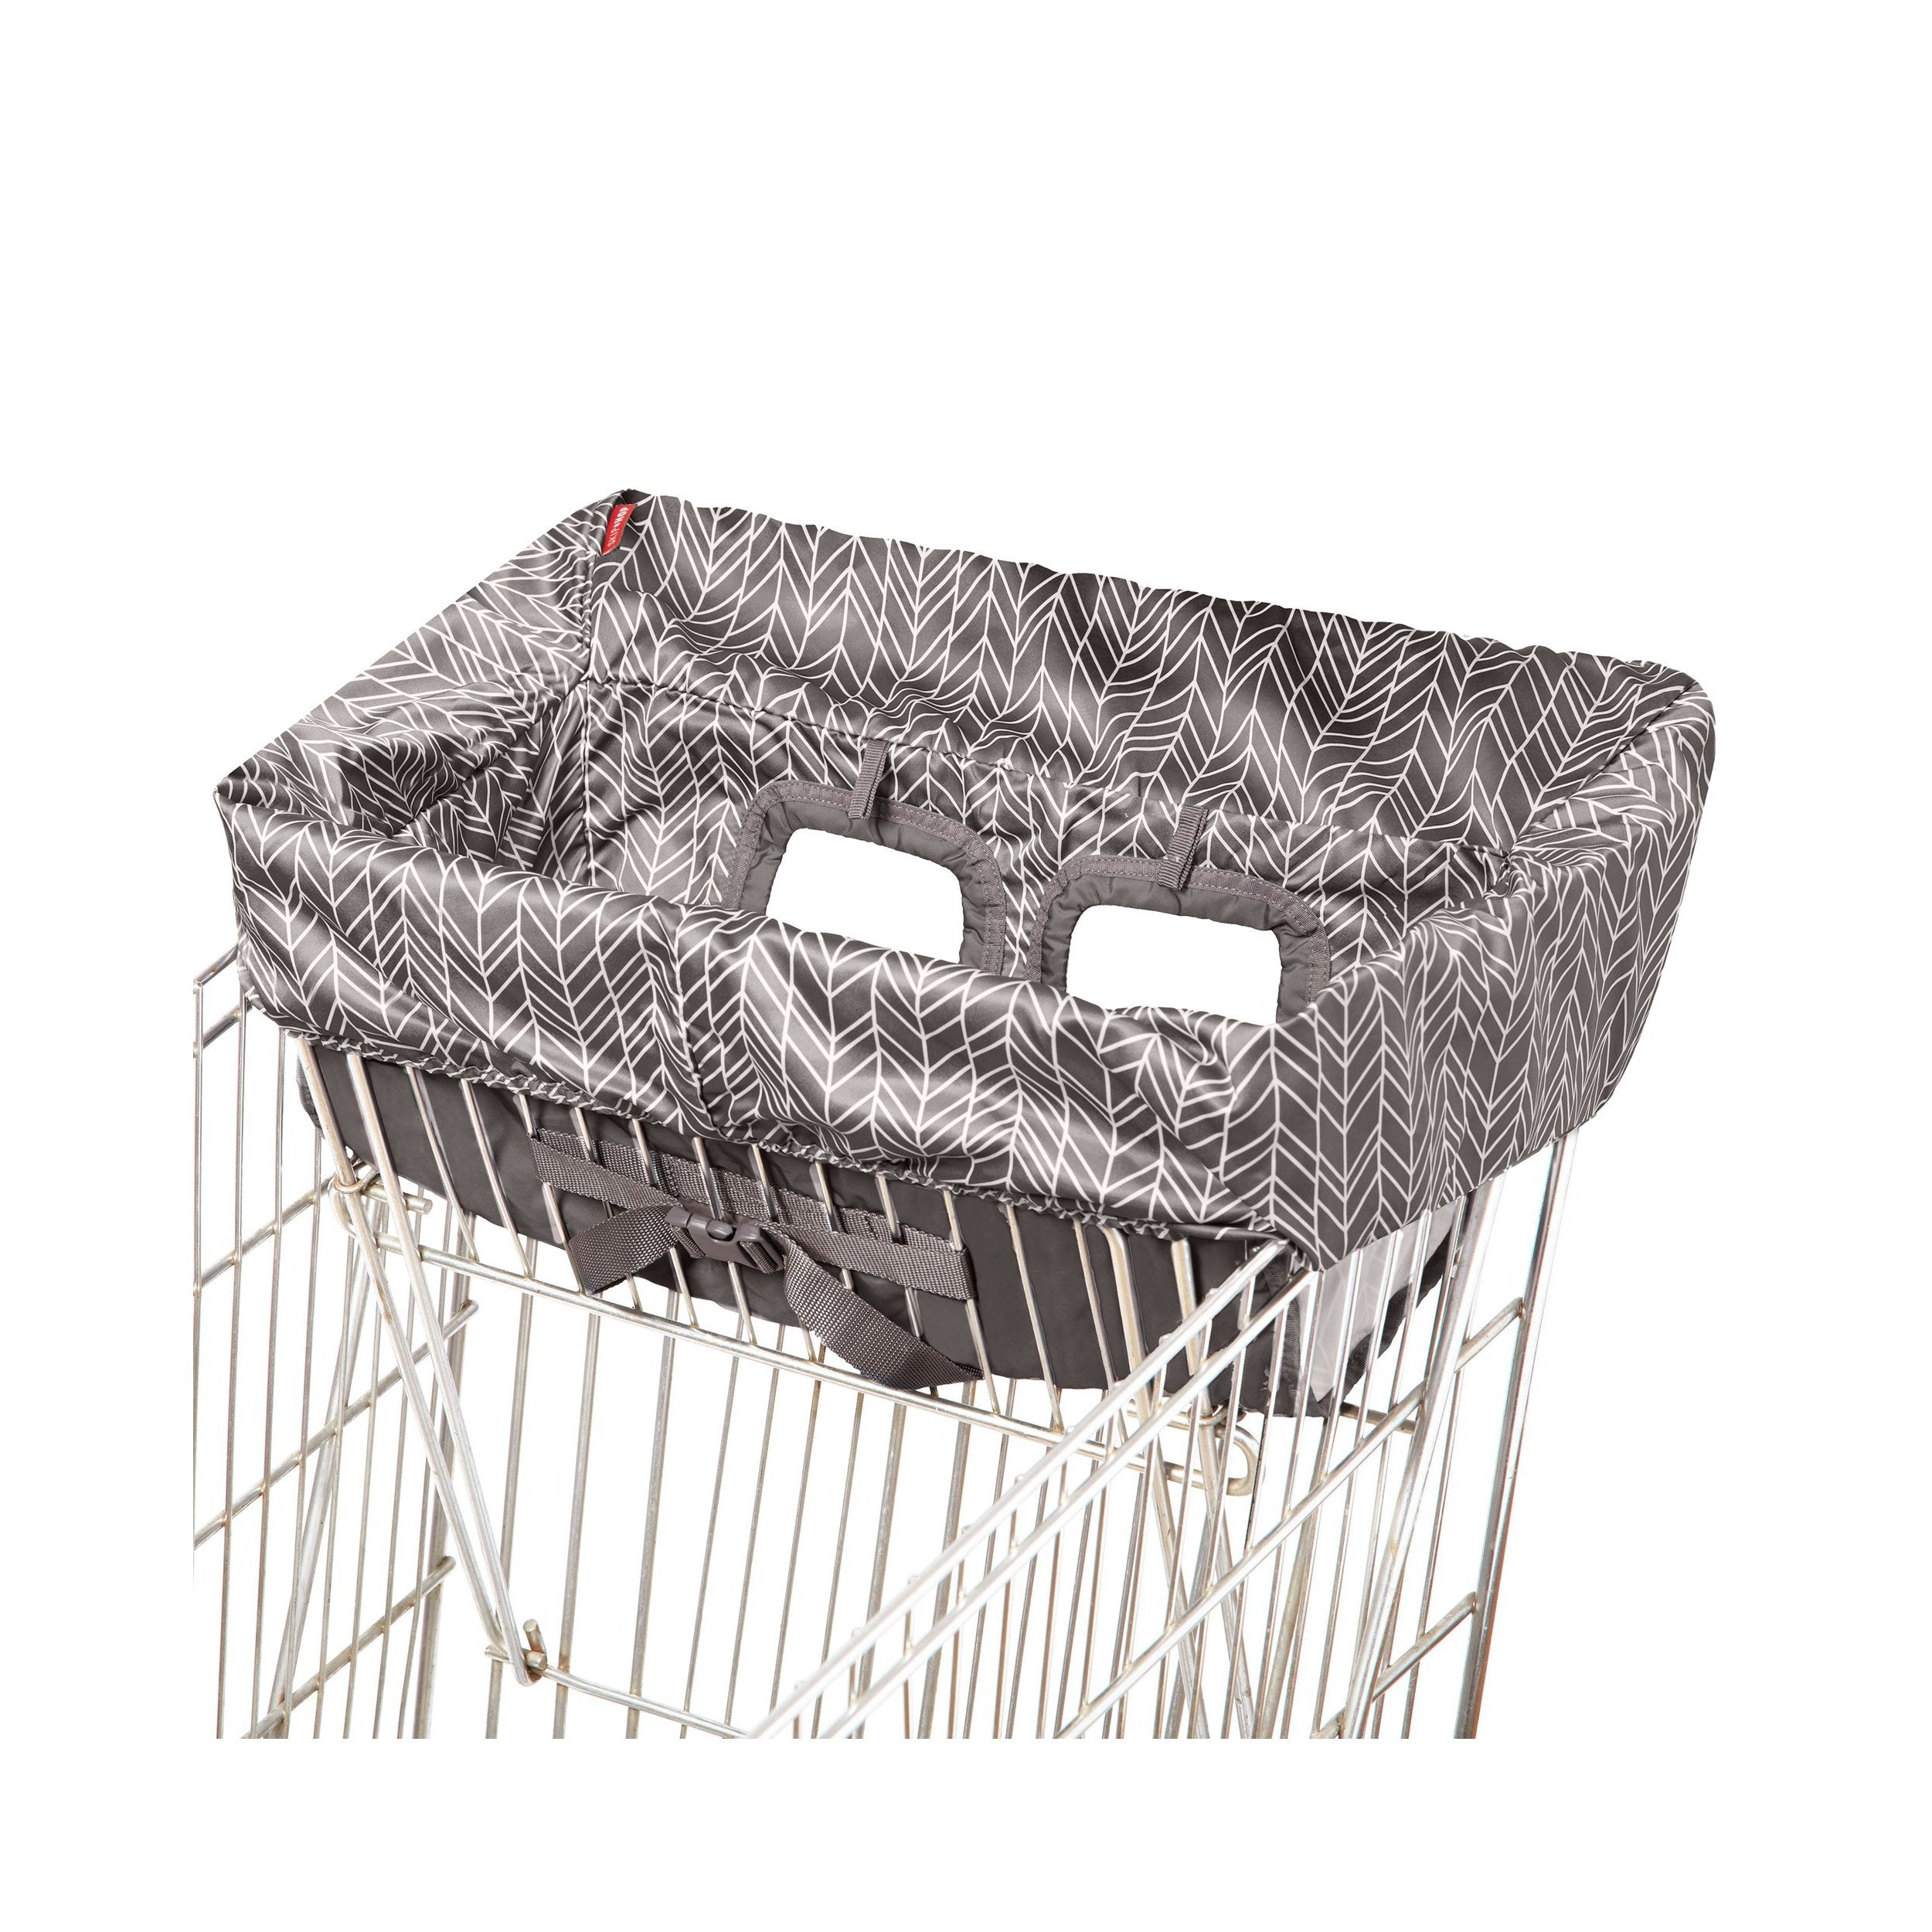 Skip Hop Take Cover Shopping Cart & Baby High Chair Cover - Grey Feather-SKIP HOP-Little Giant Kidz